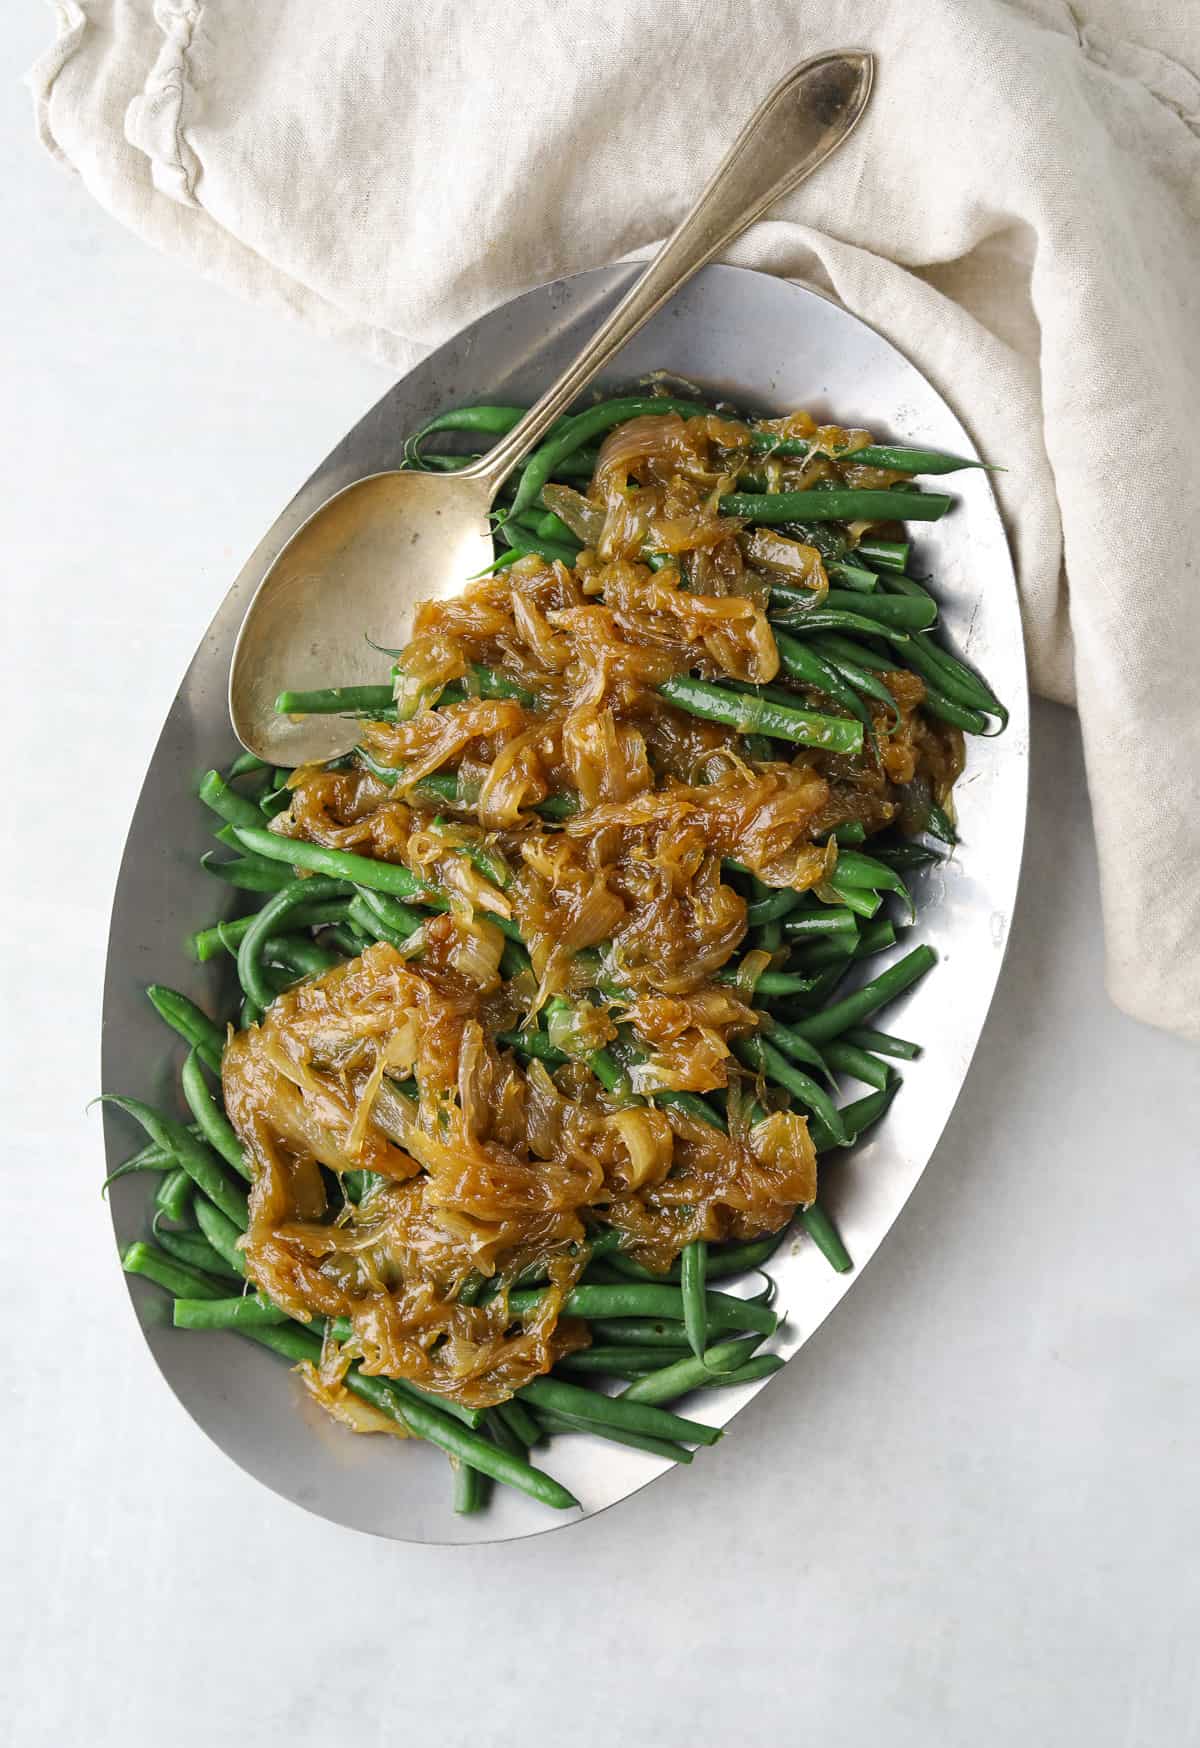 a silver platter filled with french green beans topped with golden brown caramelized onion next to a beige cloth napkin